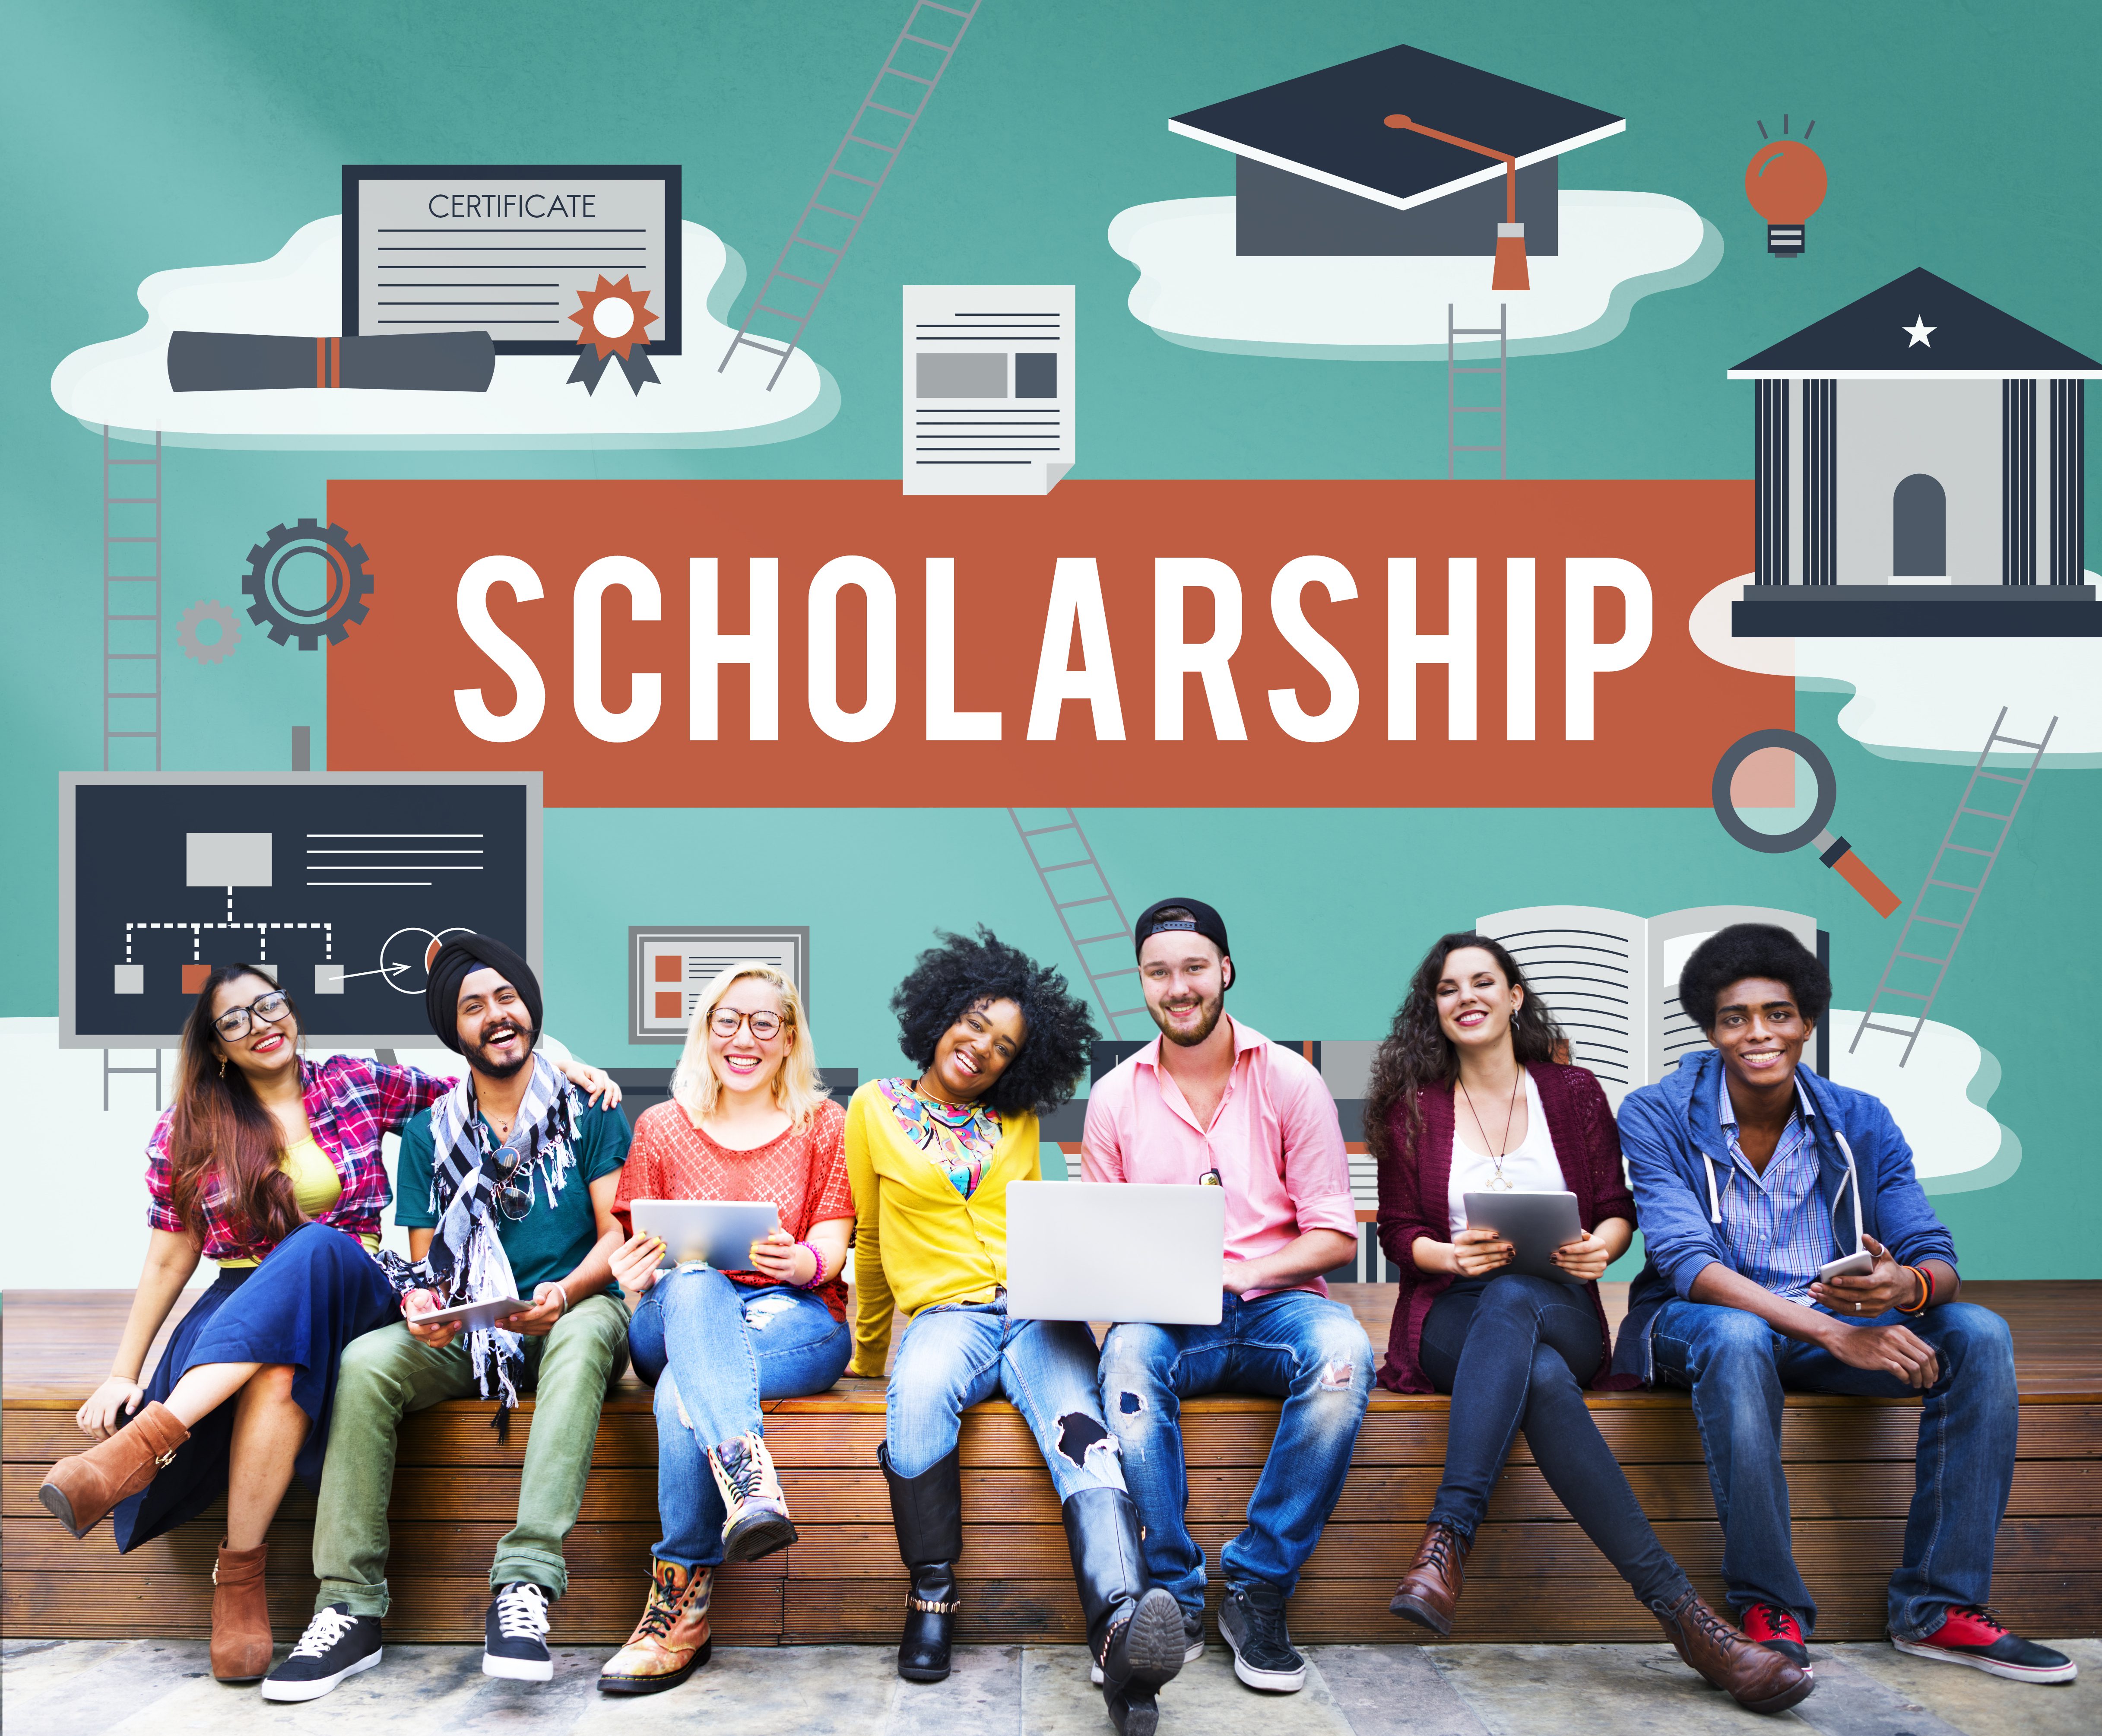 Free Scholarships For College Let's Explore The Opportunities